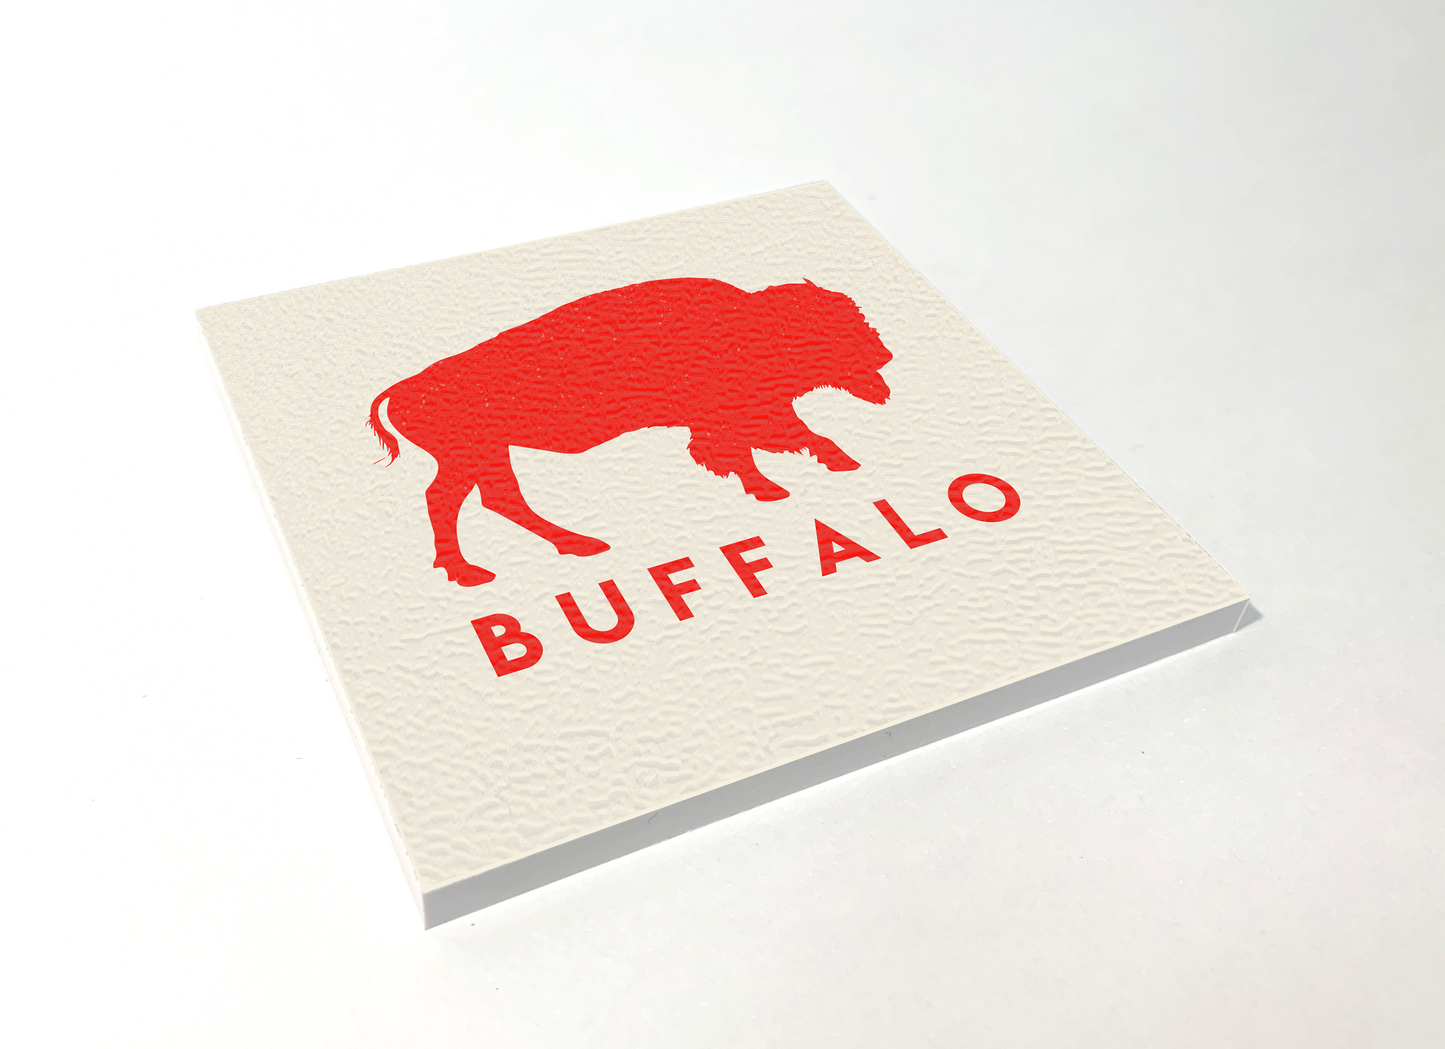 Buffalo Classic Red Square Coaster 4 Pack Designed and Handcrafted in Buffalo NY